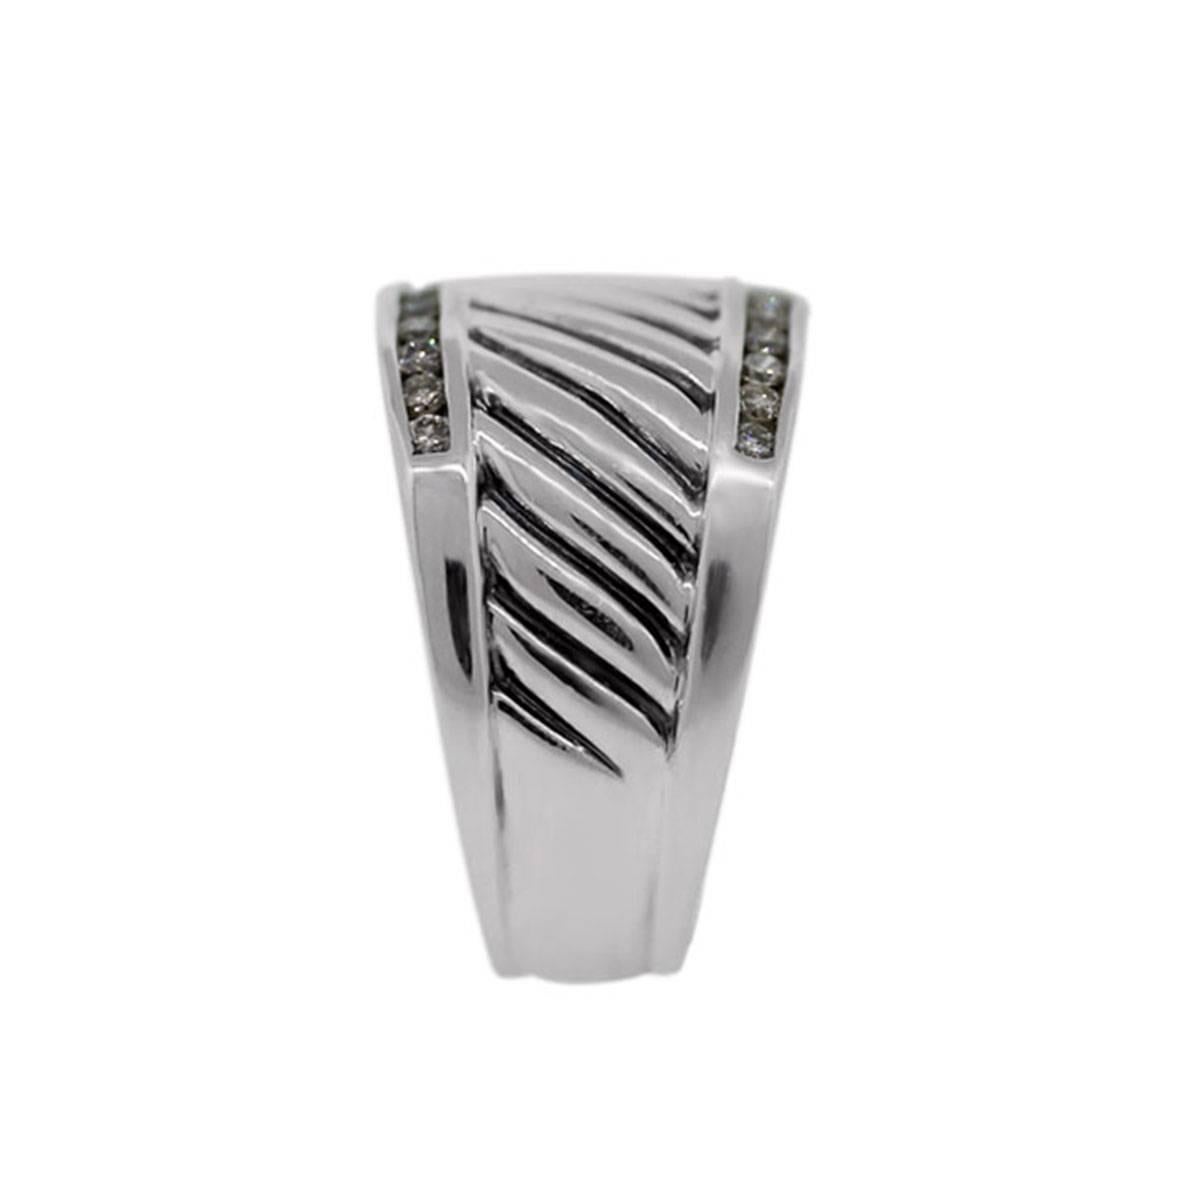 Style	David Yurman Sterling Silver Ice Diamond Cigar Band Ring
Material	Sterling Silver 
Diamonds	24 Round Diamonds 0.50ctw
Diamond Color	F/G
Diamond Clarity	VS
Total Weight	10.2g (6.5dwt)
Ring Size	Size 8 (Can be Sized)
Box	This item comes complete